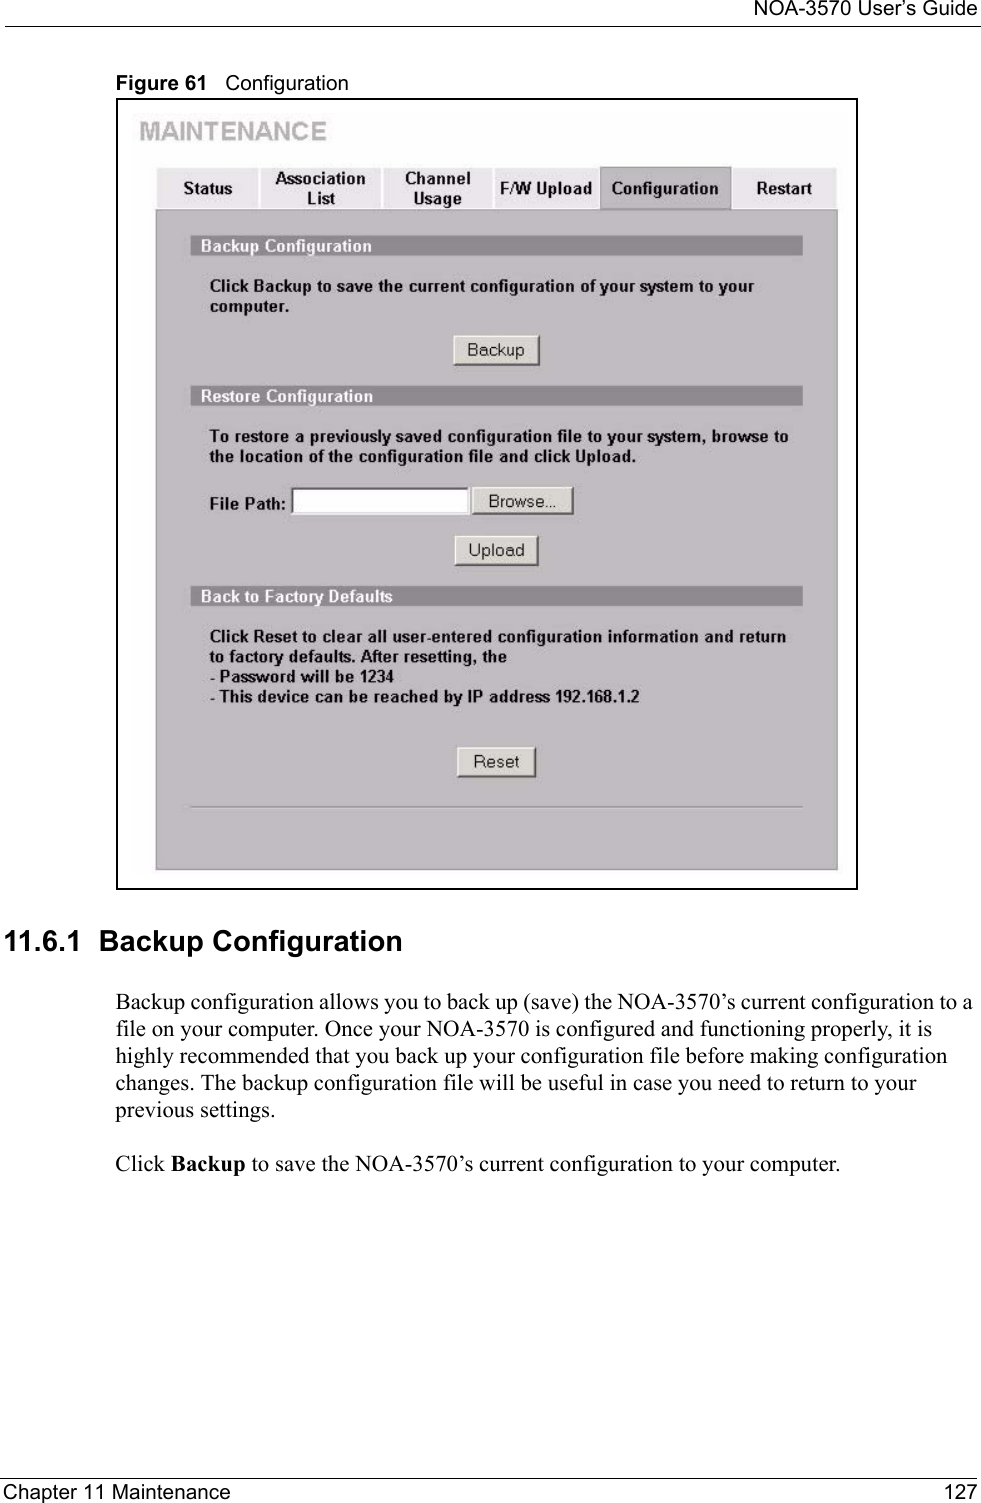 NOA-3570 User’s GuideChapter 11 Maintenance 127Figure 61   Configuration11.6.1  Backup ConfigurationBackup configuration allows you to back up (save) the NOA-3570’s current configuration to a file on your computer. Once your NOA-3570 is configured and functioning properly, it is highly recommended that you back up your configuration file before making configuration changes. The backup configuration file will be useful in case you need to return to your previous settings. Click Backup to save the NOA-3570’s current configuration to your computer.